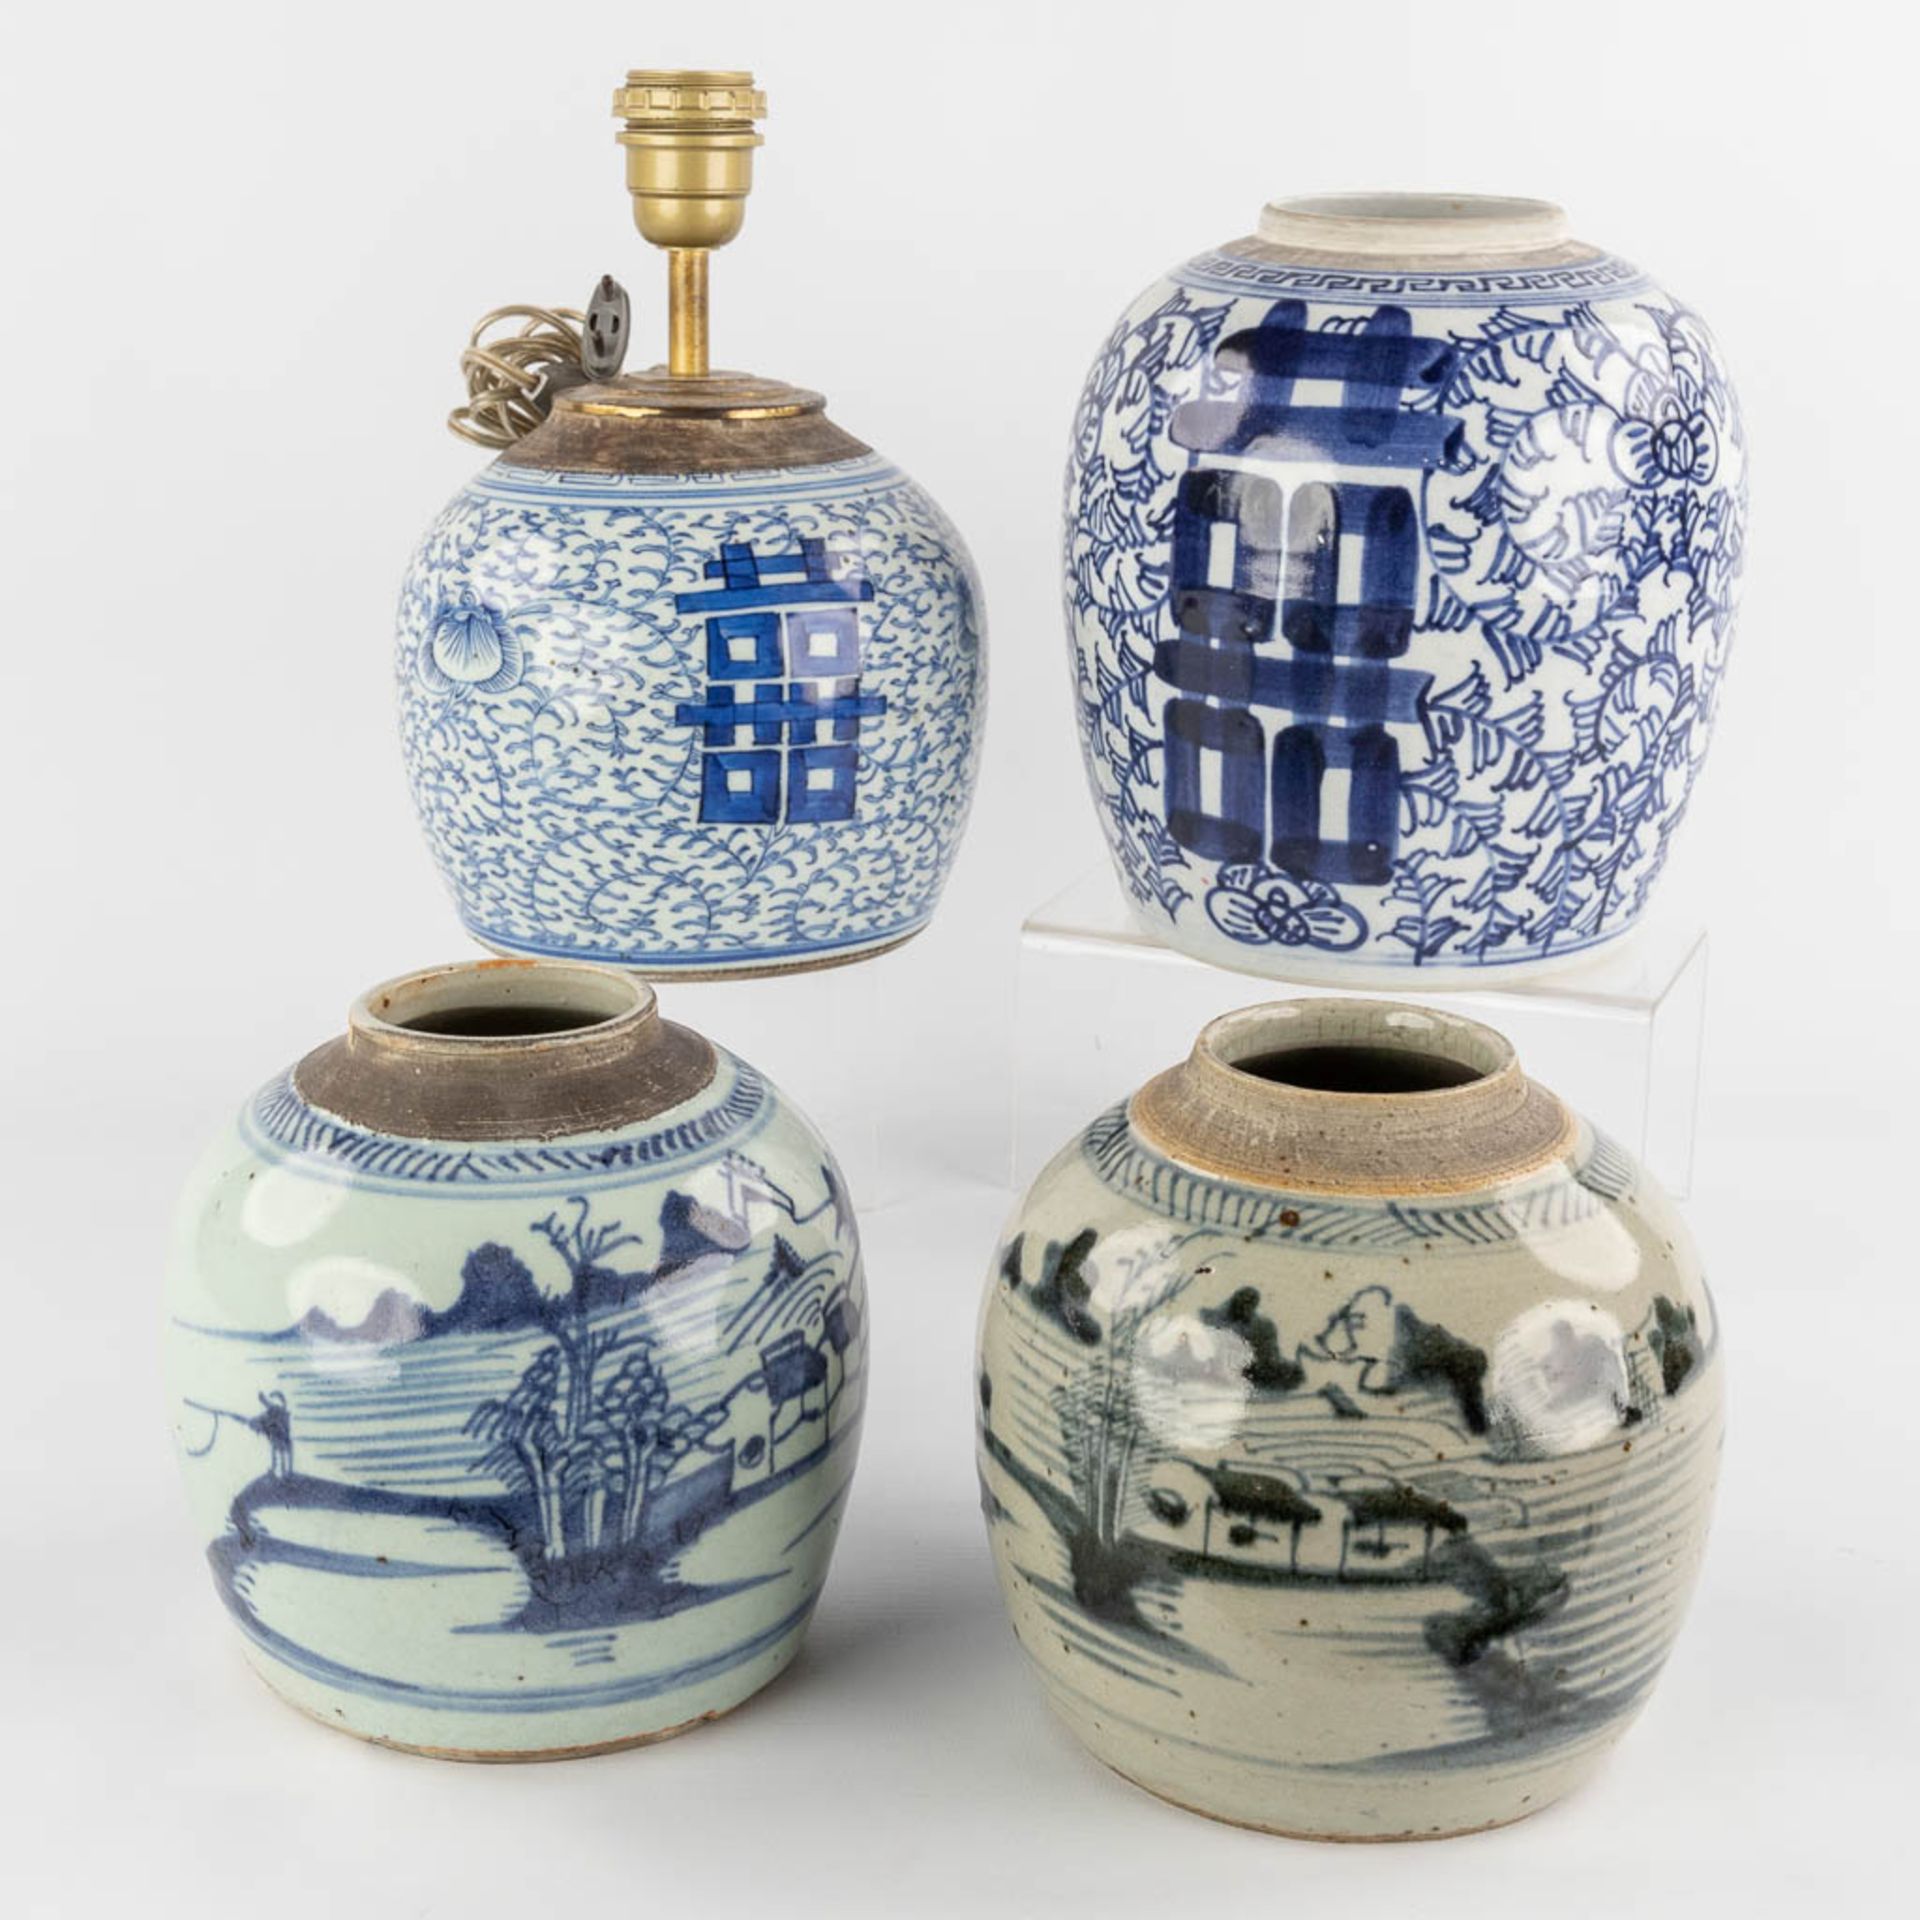 4 Chinese ginger jars with blue-white decor. 19th/20th C. (H:23 x D:21 cm)